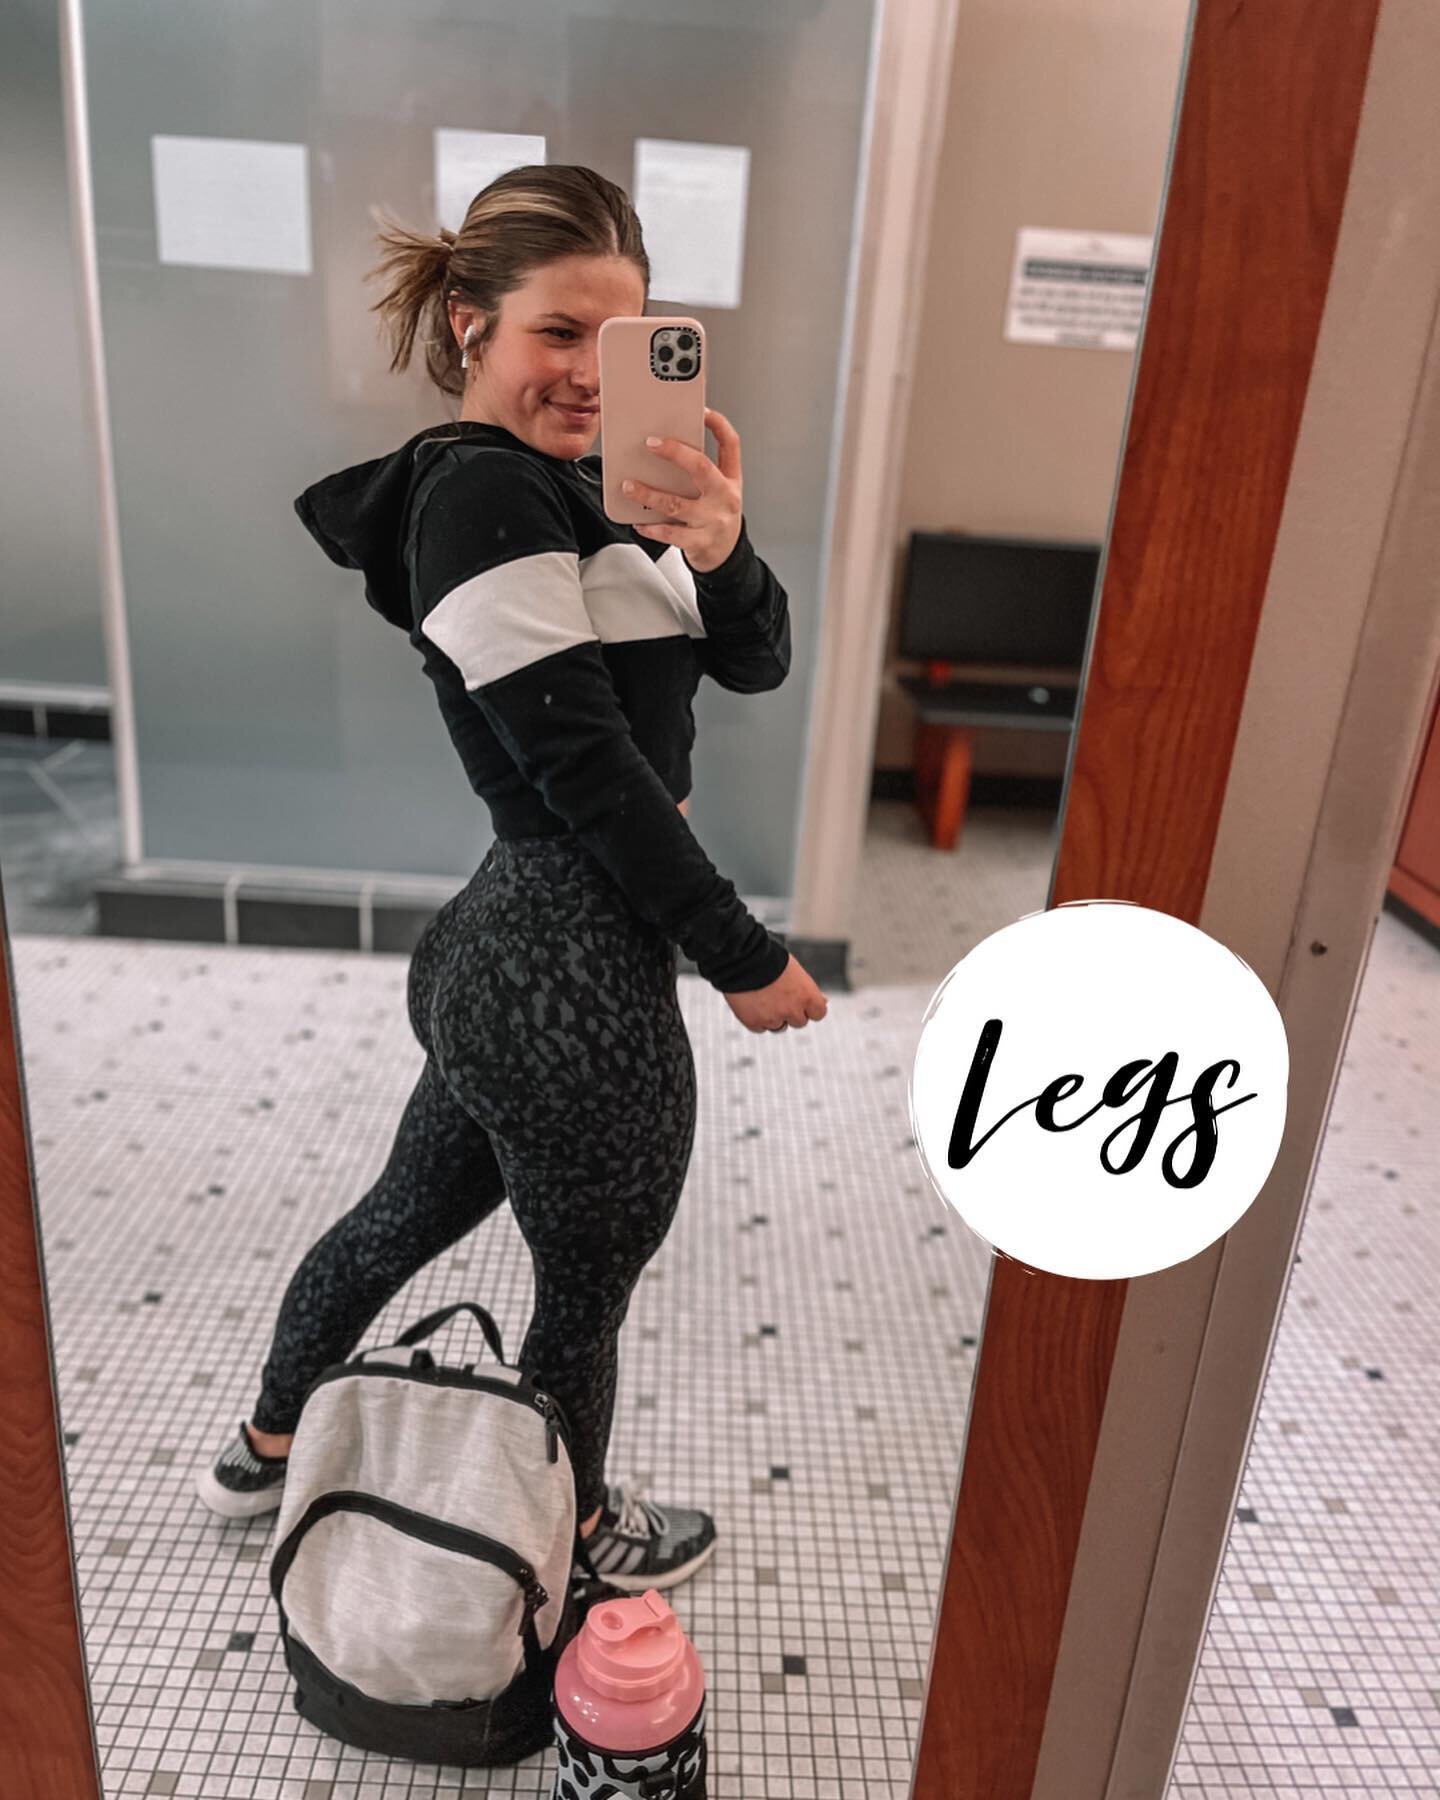 LEG DAYYY!🤩
This one is minimum equipment so you can easily do this anywhere!
Don&rsquo;t forget to save for later!
4 sets x 10-15 reps each!
&bull;elevated reverse lunge
&bull;elevated calf raises
&bull;elevated single leg glute bridge
&bull;sumo s